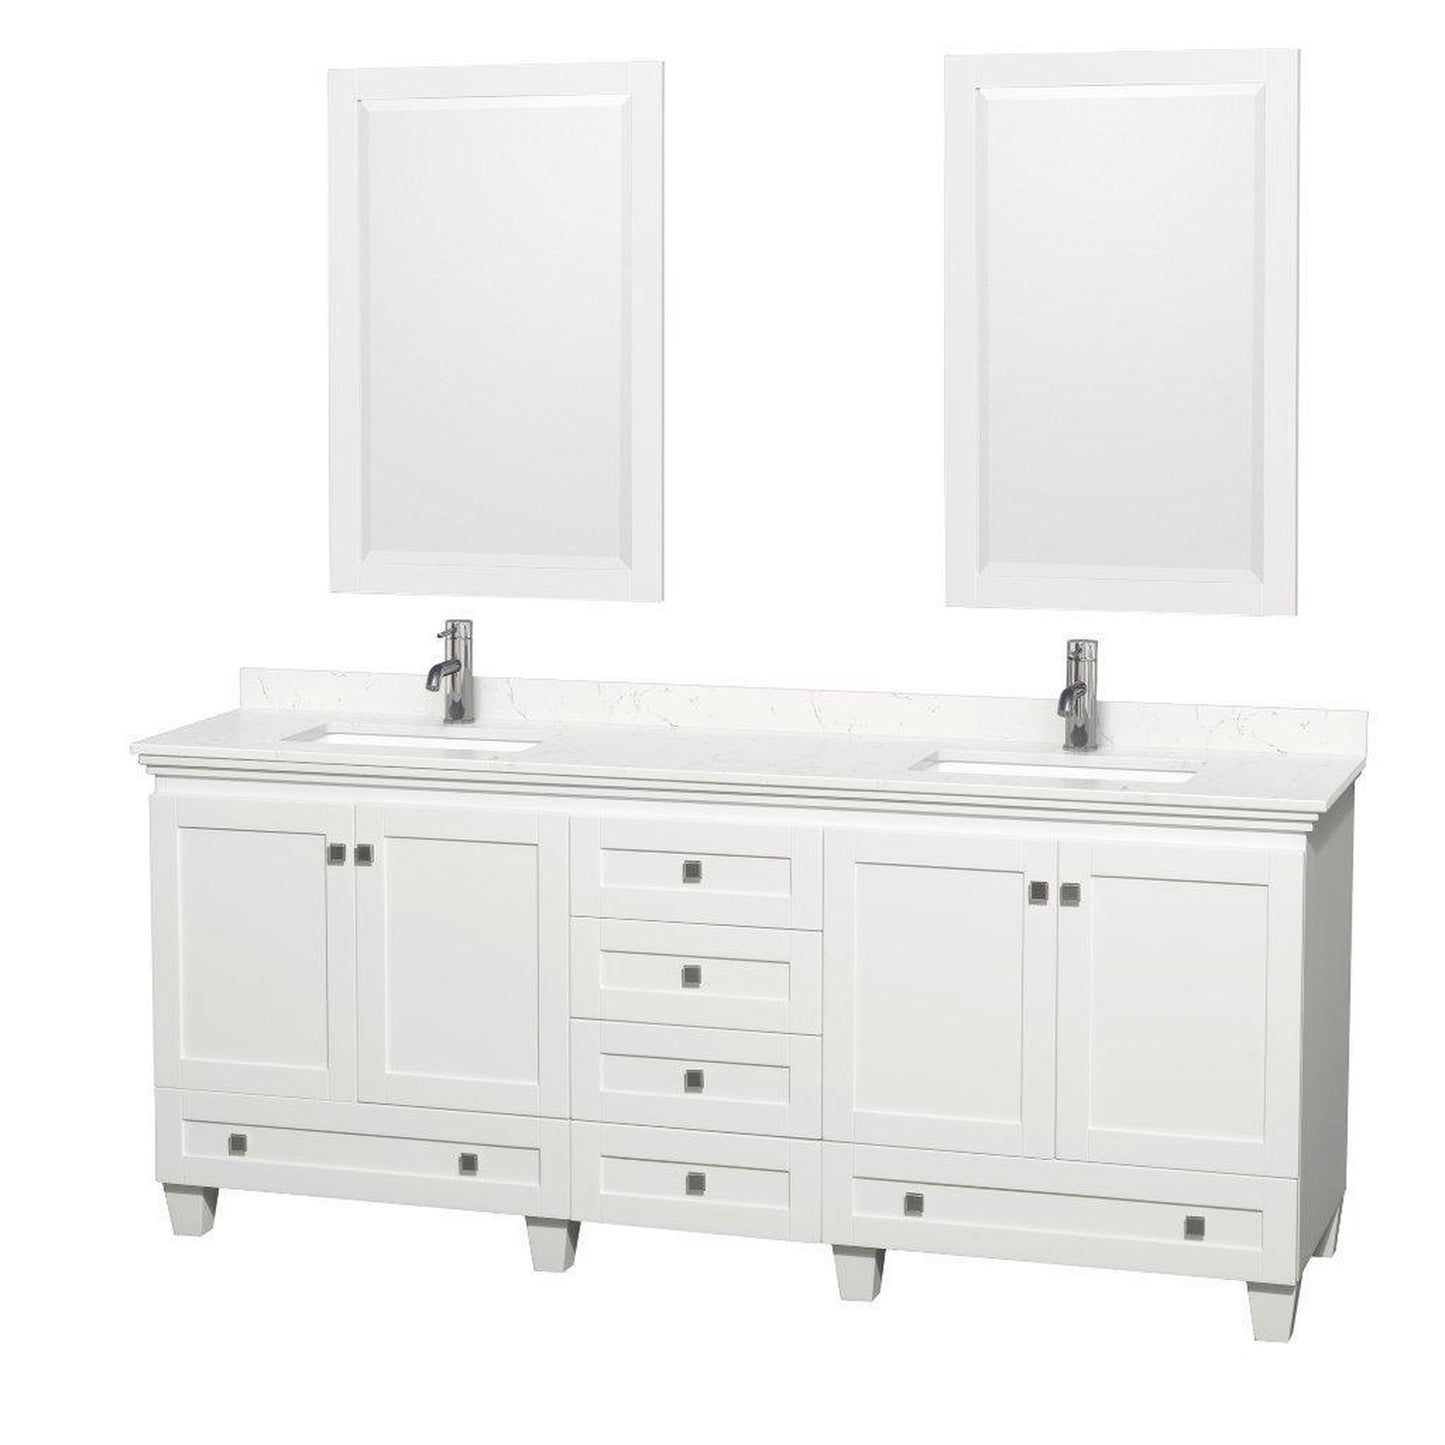 Wyndham Collection Acclaim 80" Double Bathroom White Vanity With Light-Vein Carrara Cultured Marble Countertop And Undermount Square Sinks And 2 Set Of 24" Mirror